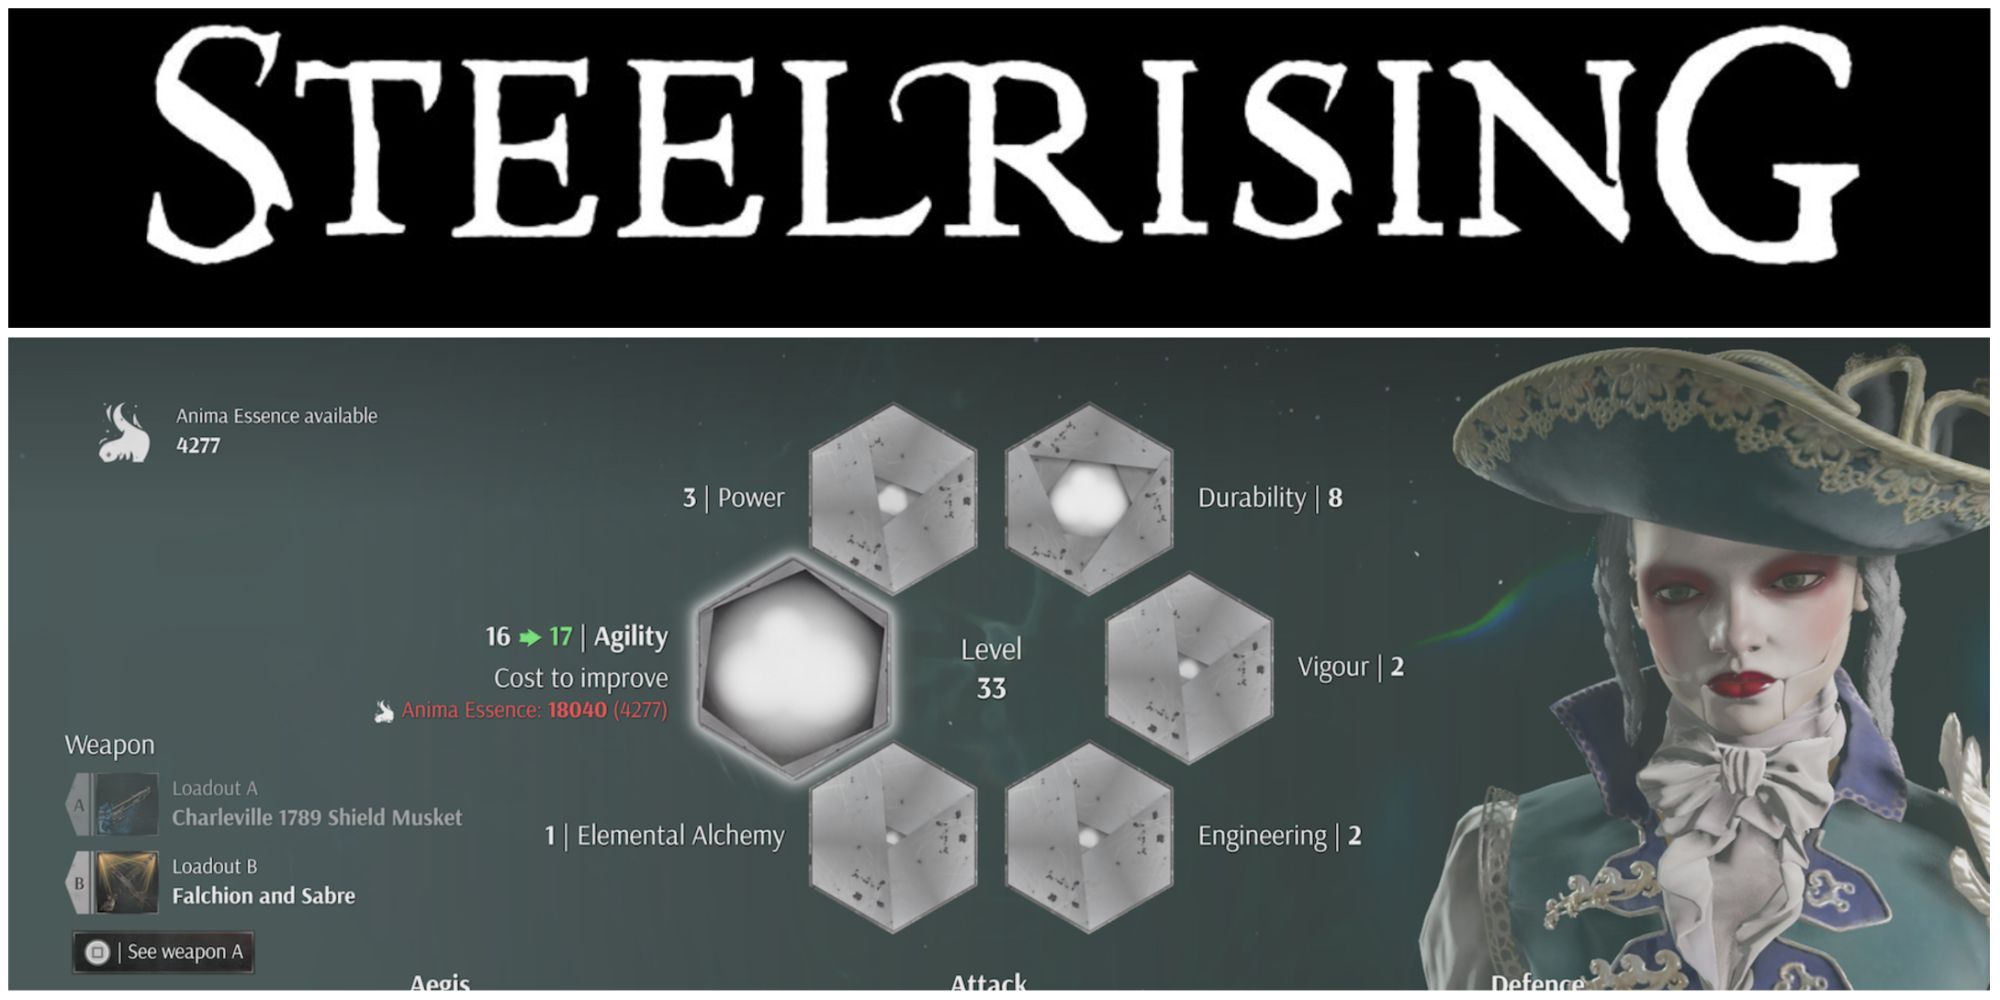 Steelrising Feature Image